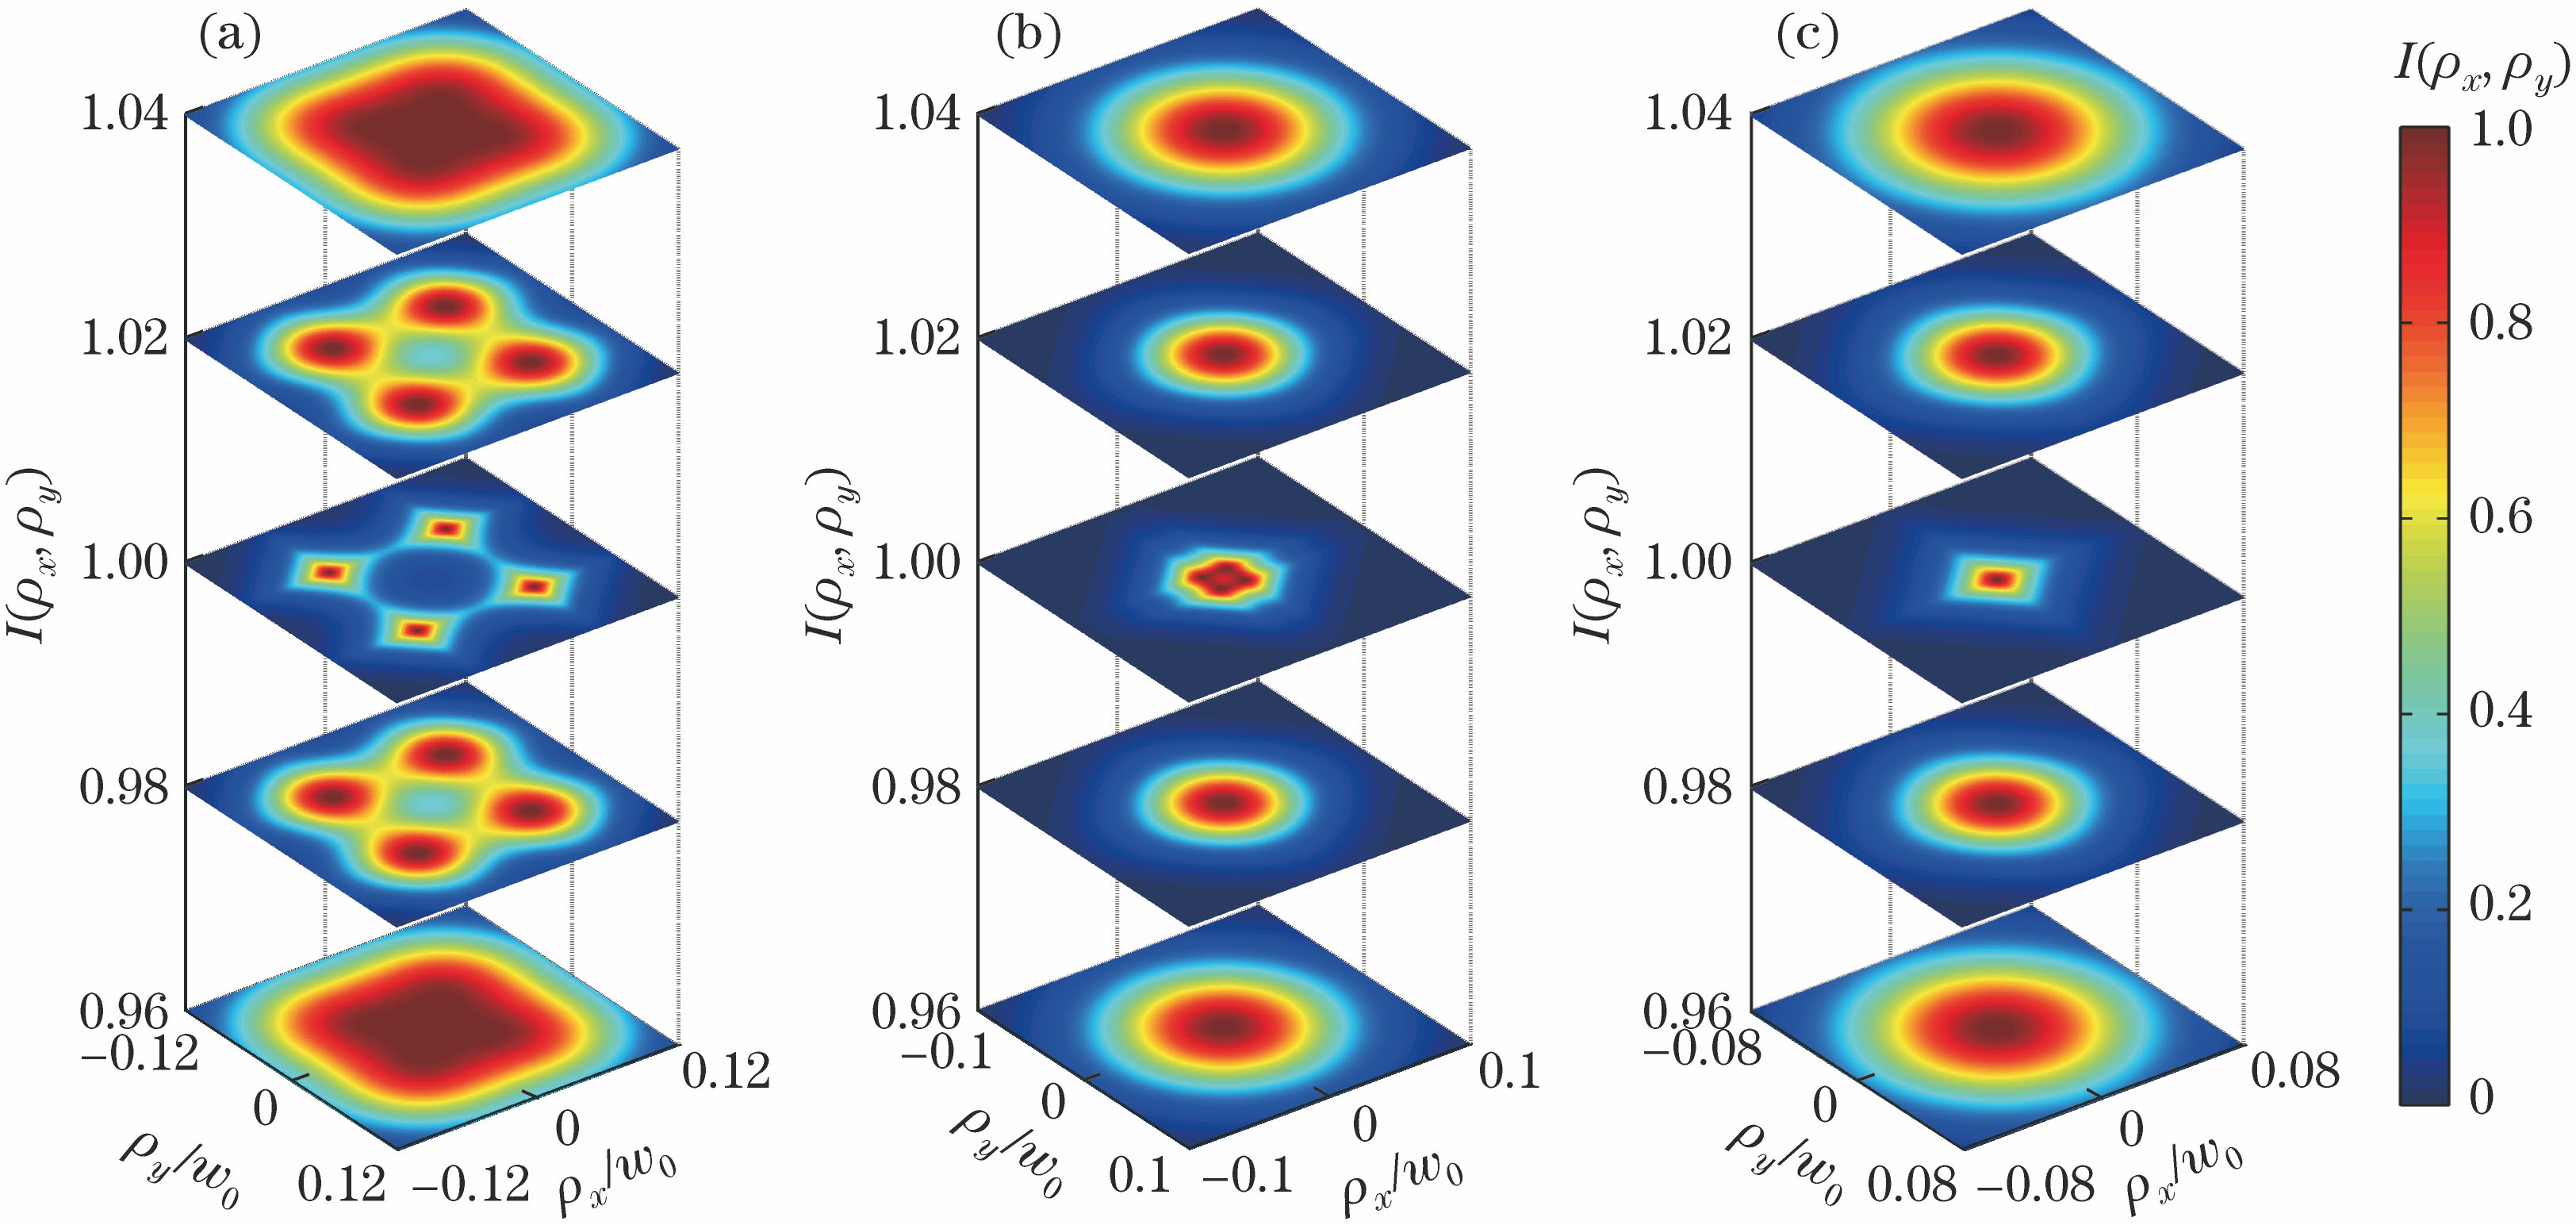 Intensity distributions of cLSM beam near focusing point for different β when δw=1/5 and FN=100. (a) β=2.0; (b) β=0.5; (c) β=0